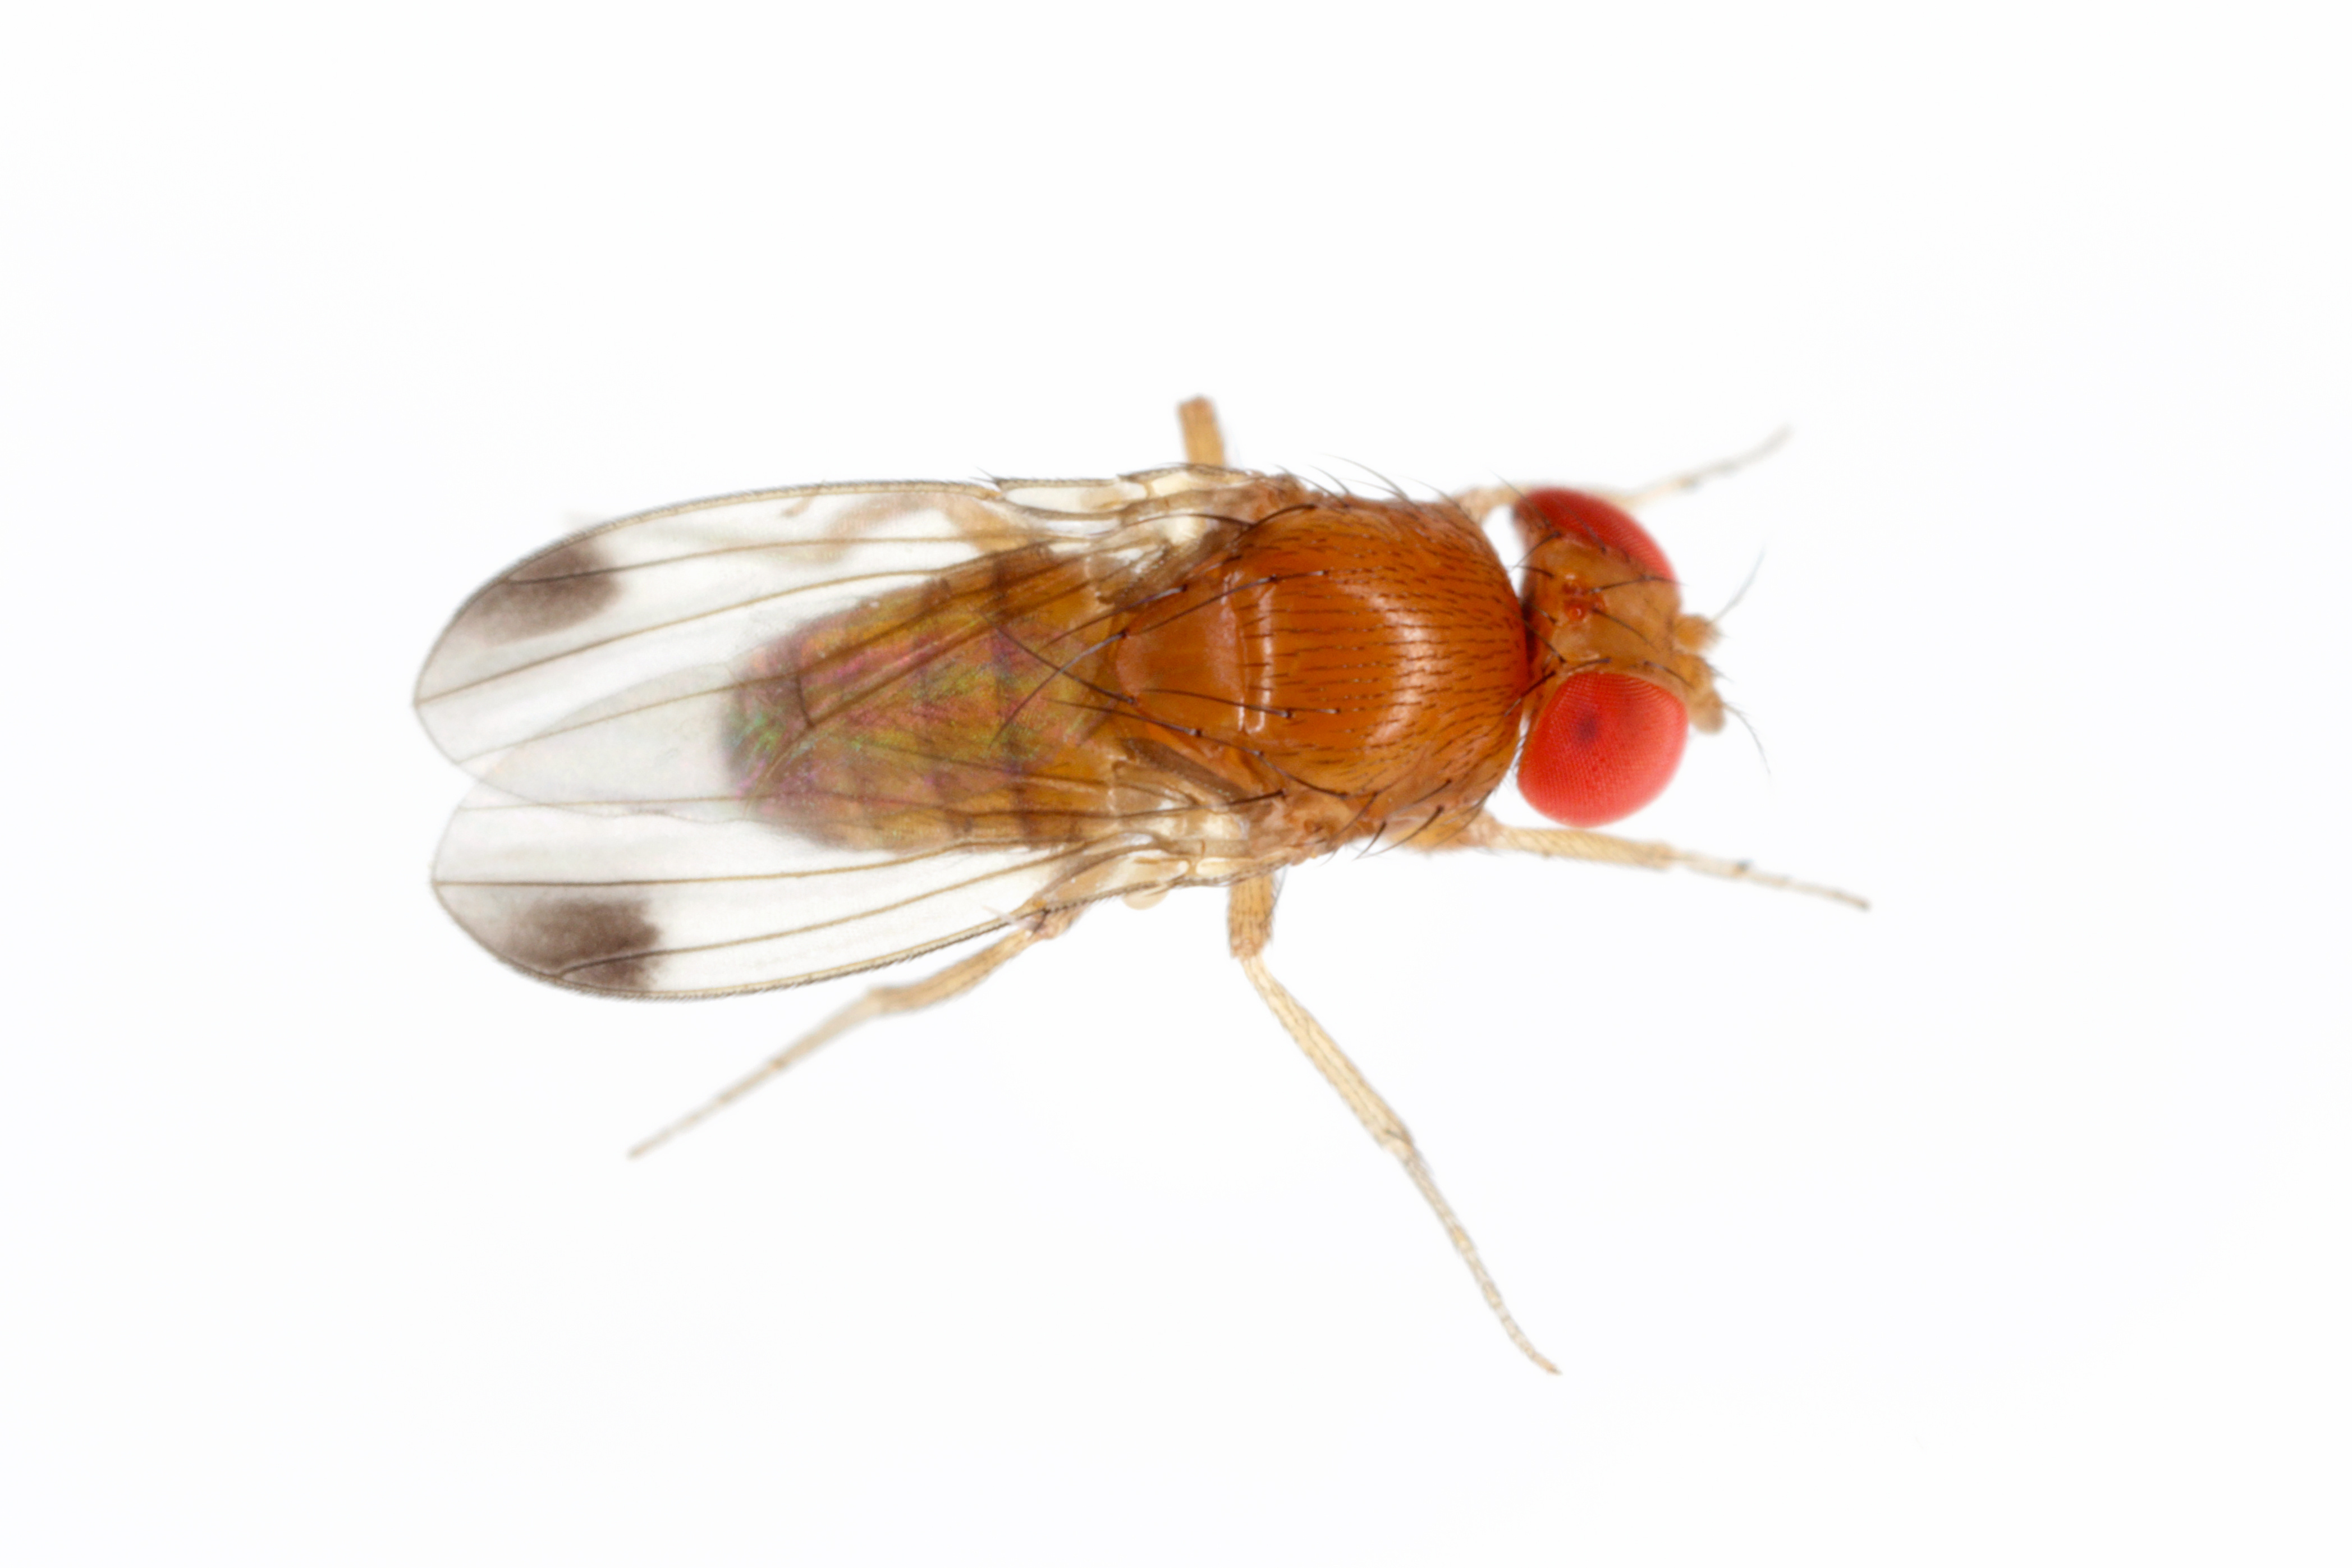 Drosophila suzuki - commonly called the spotted wing drosophila